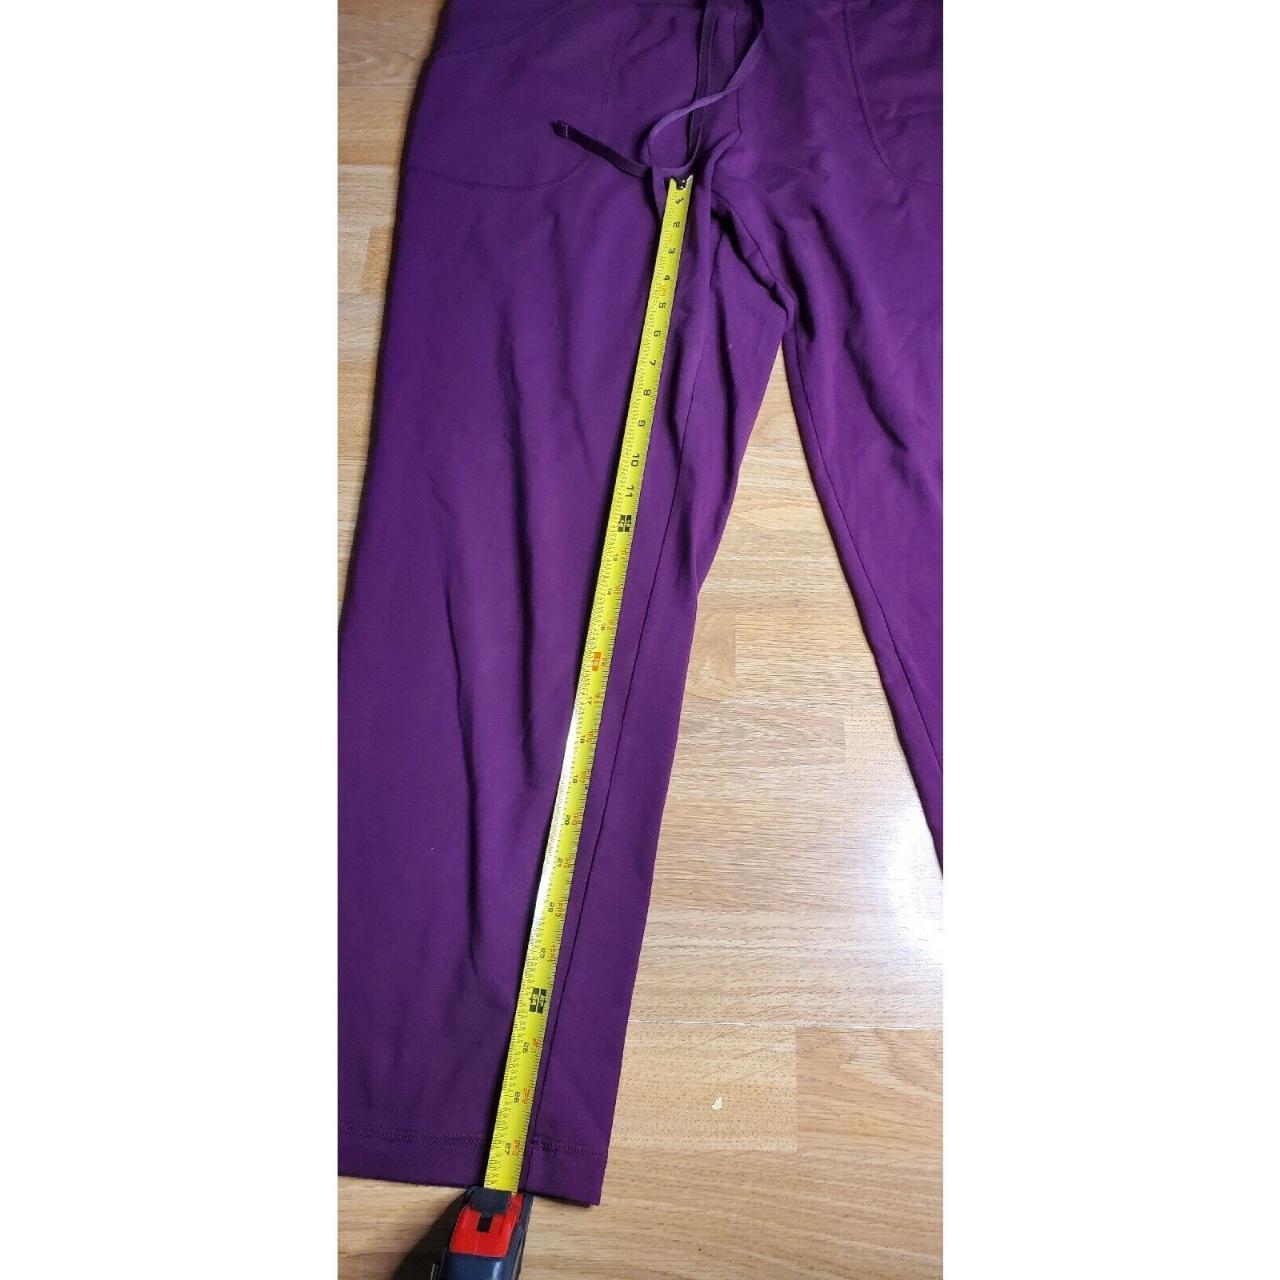 Athletic Works Pants & Jumpsuits for Women - Poshmark